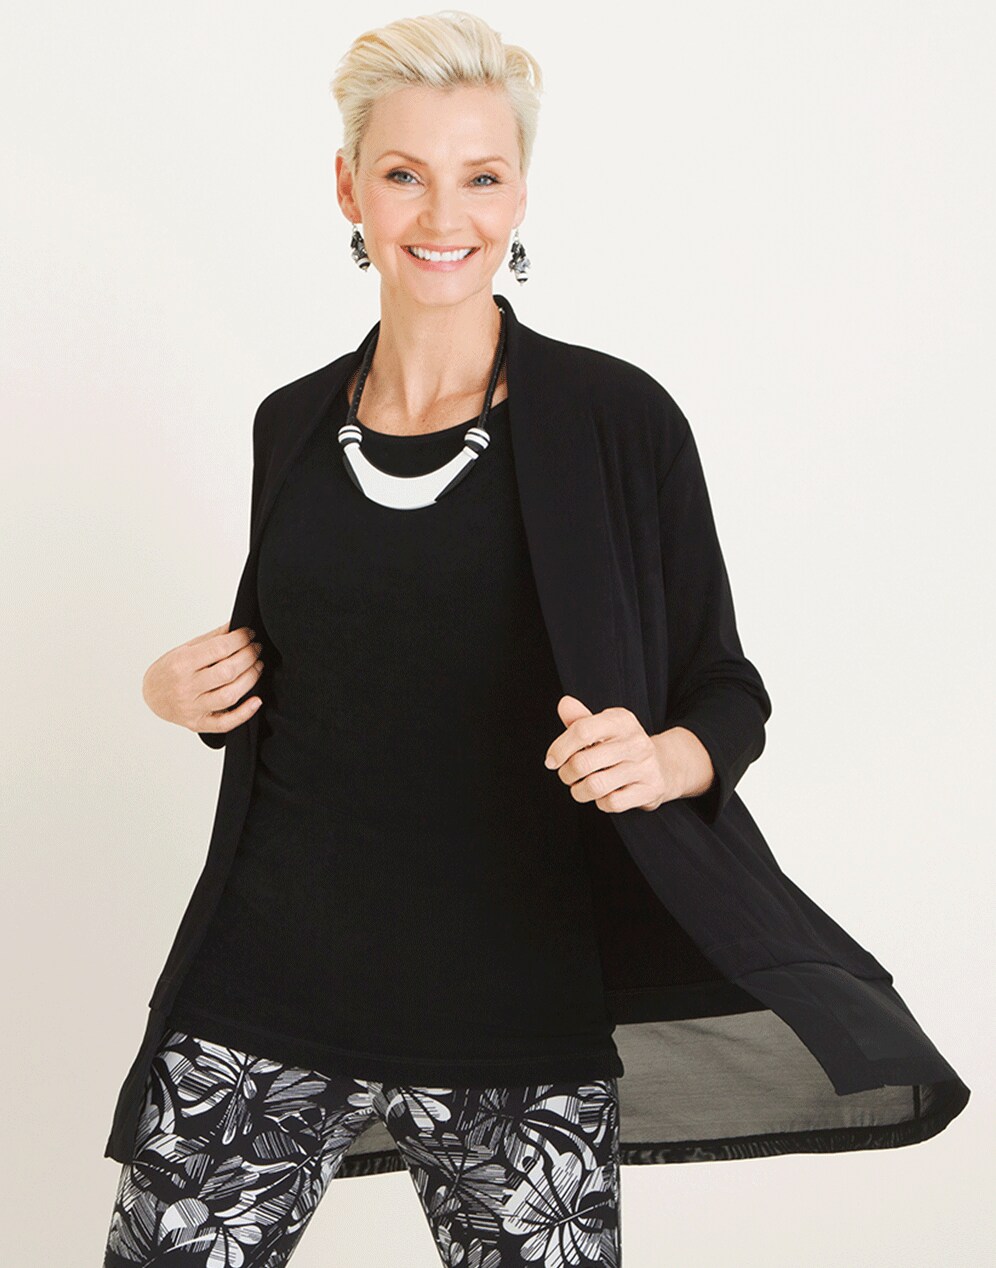 Chicos' Travelers Collection: Perfect for the Active, Over 50 Lifestyle